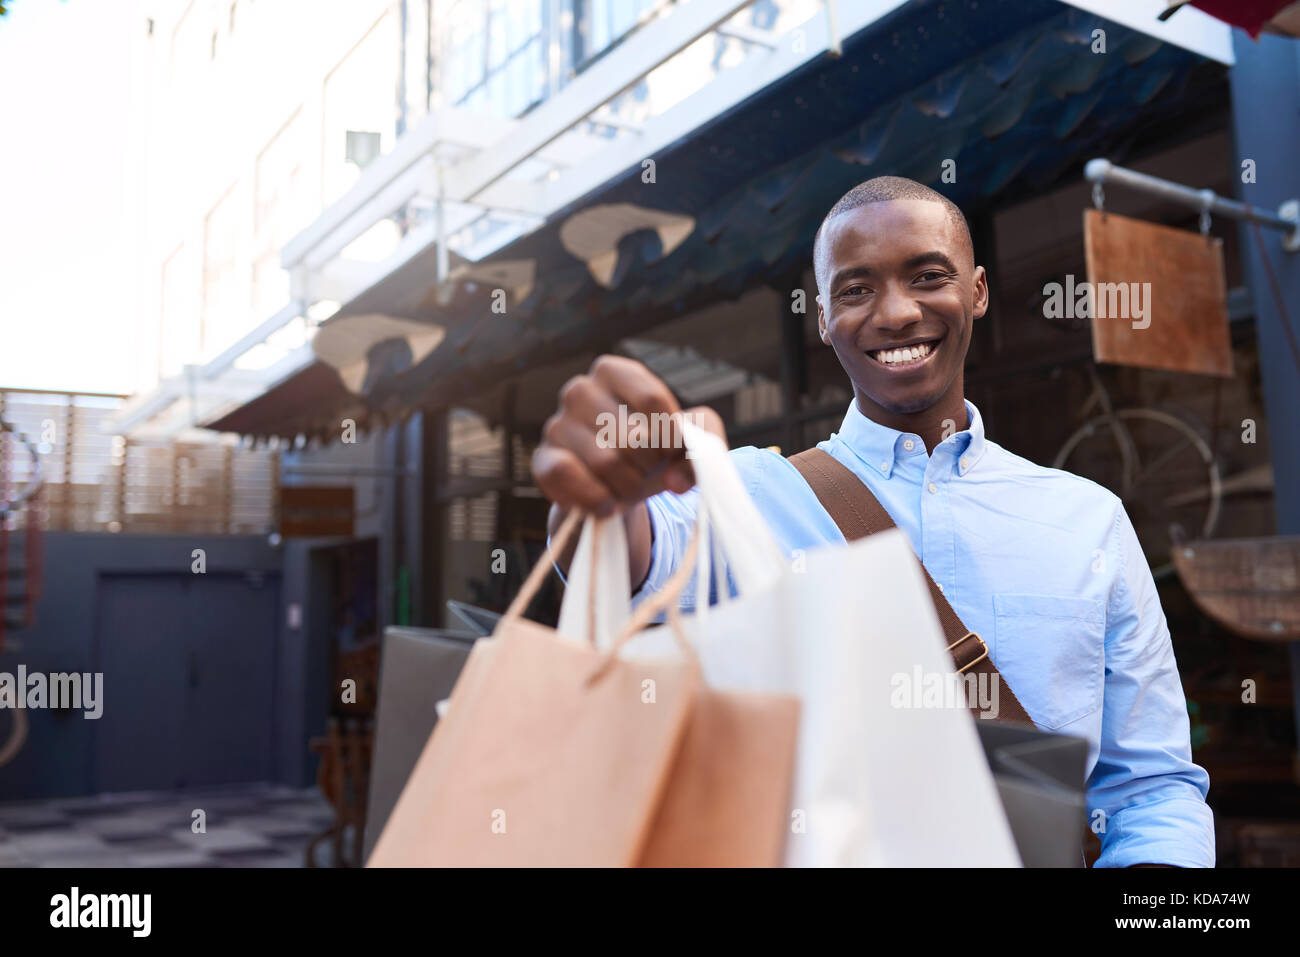 Smiling young man standing outside holding up shopping bags Stock Photo